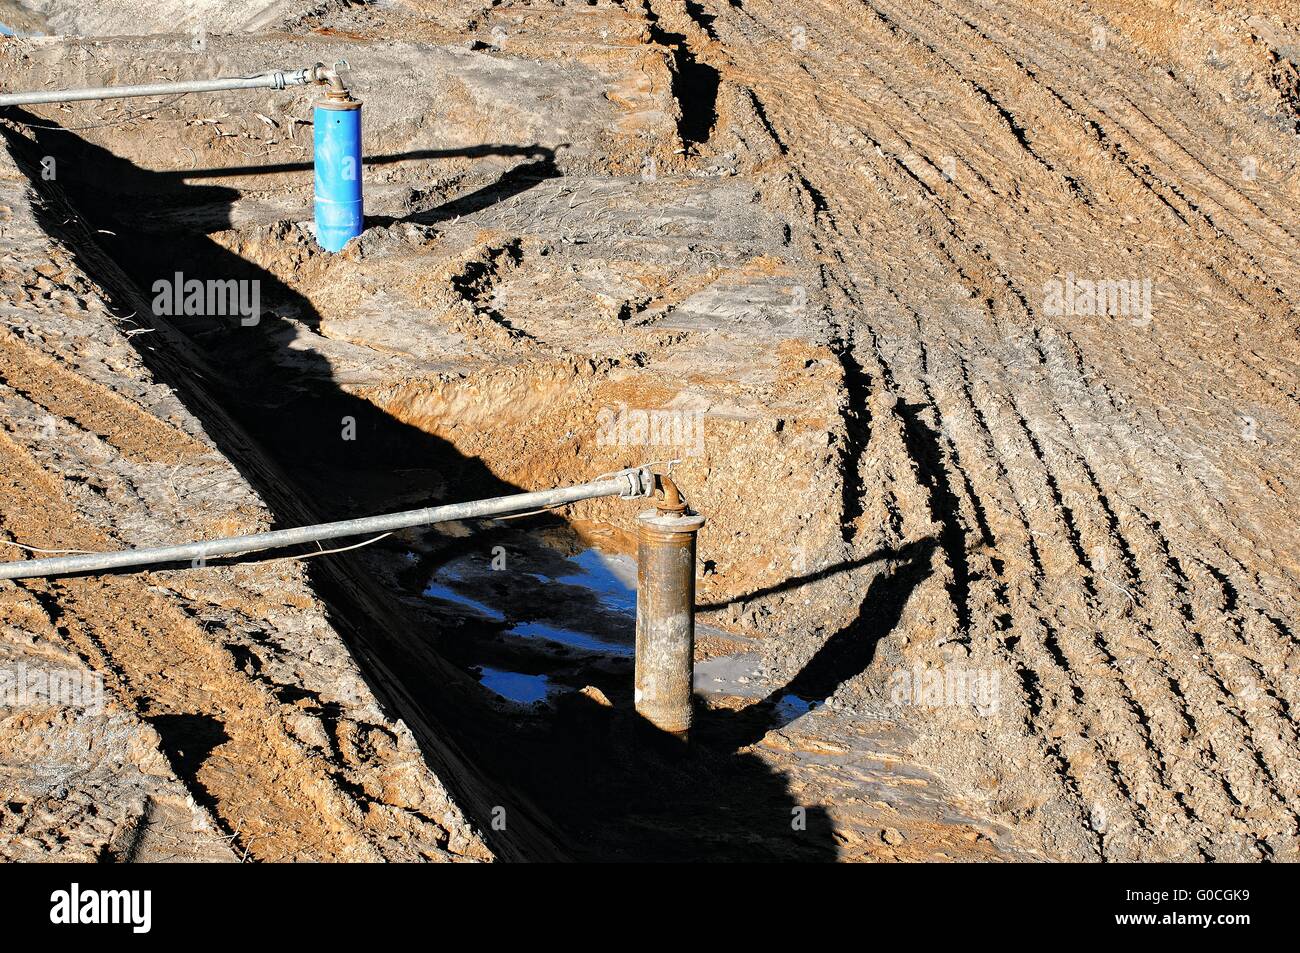 Groundwater conservation on the construction site Stock Photo